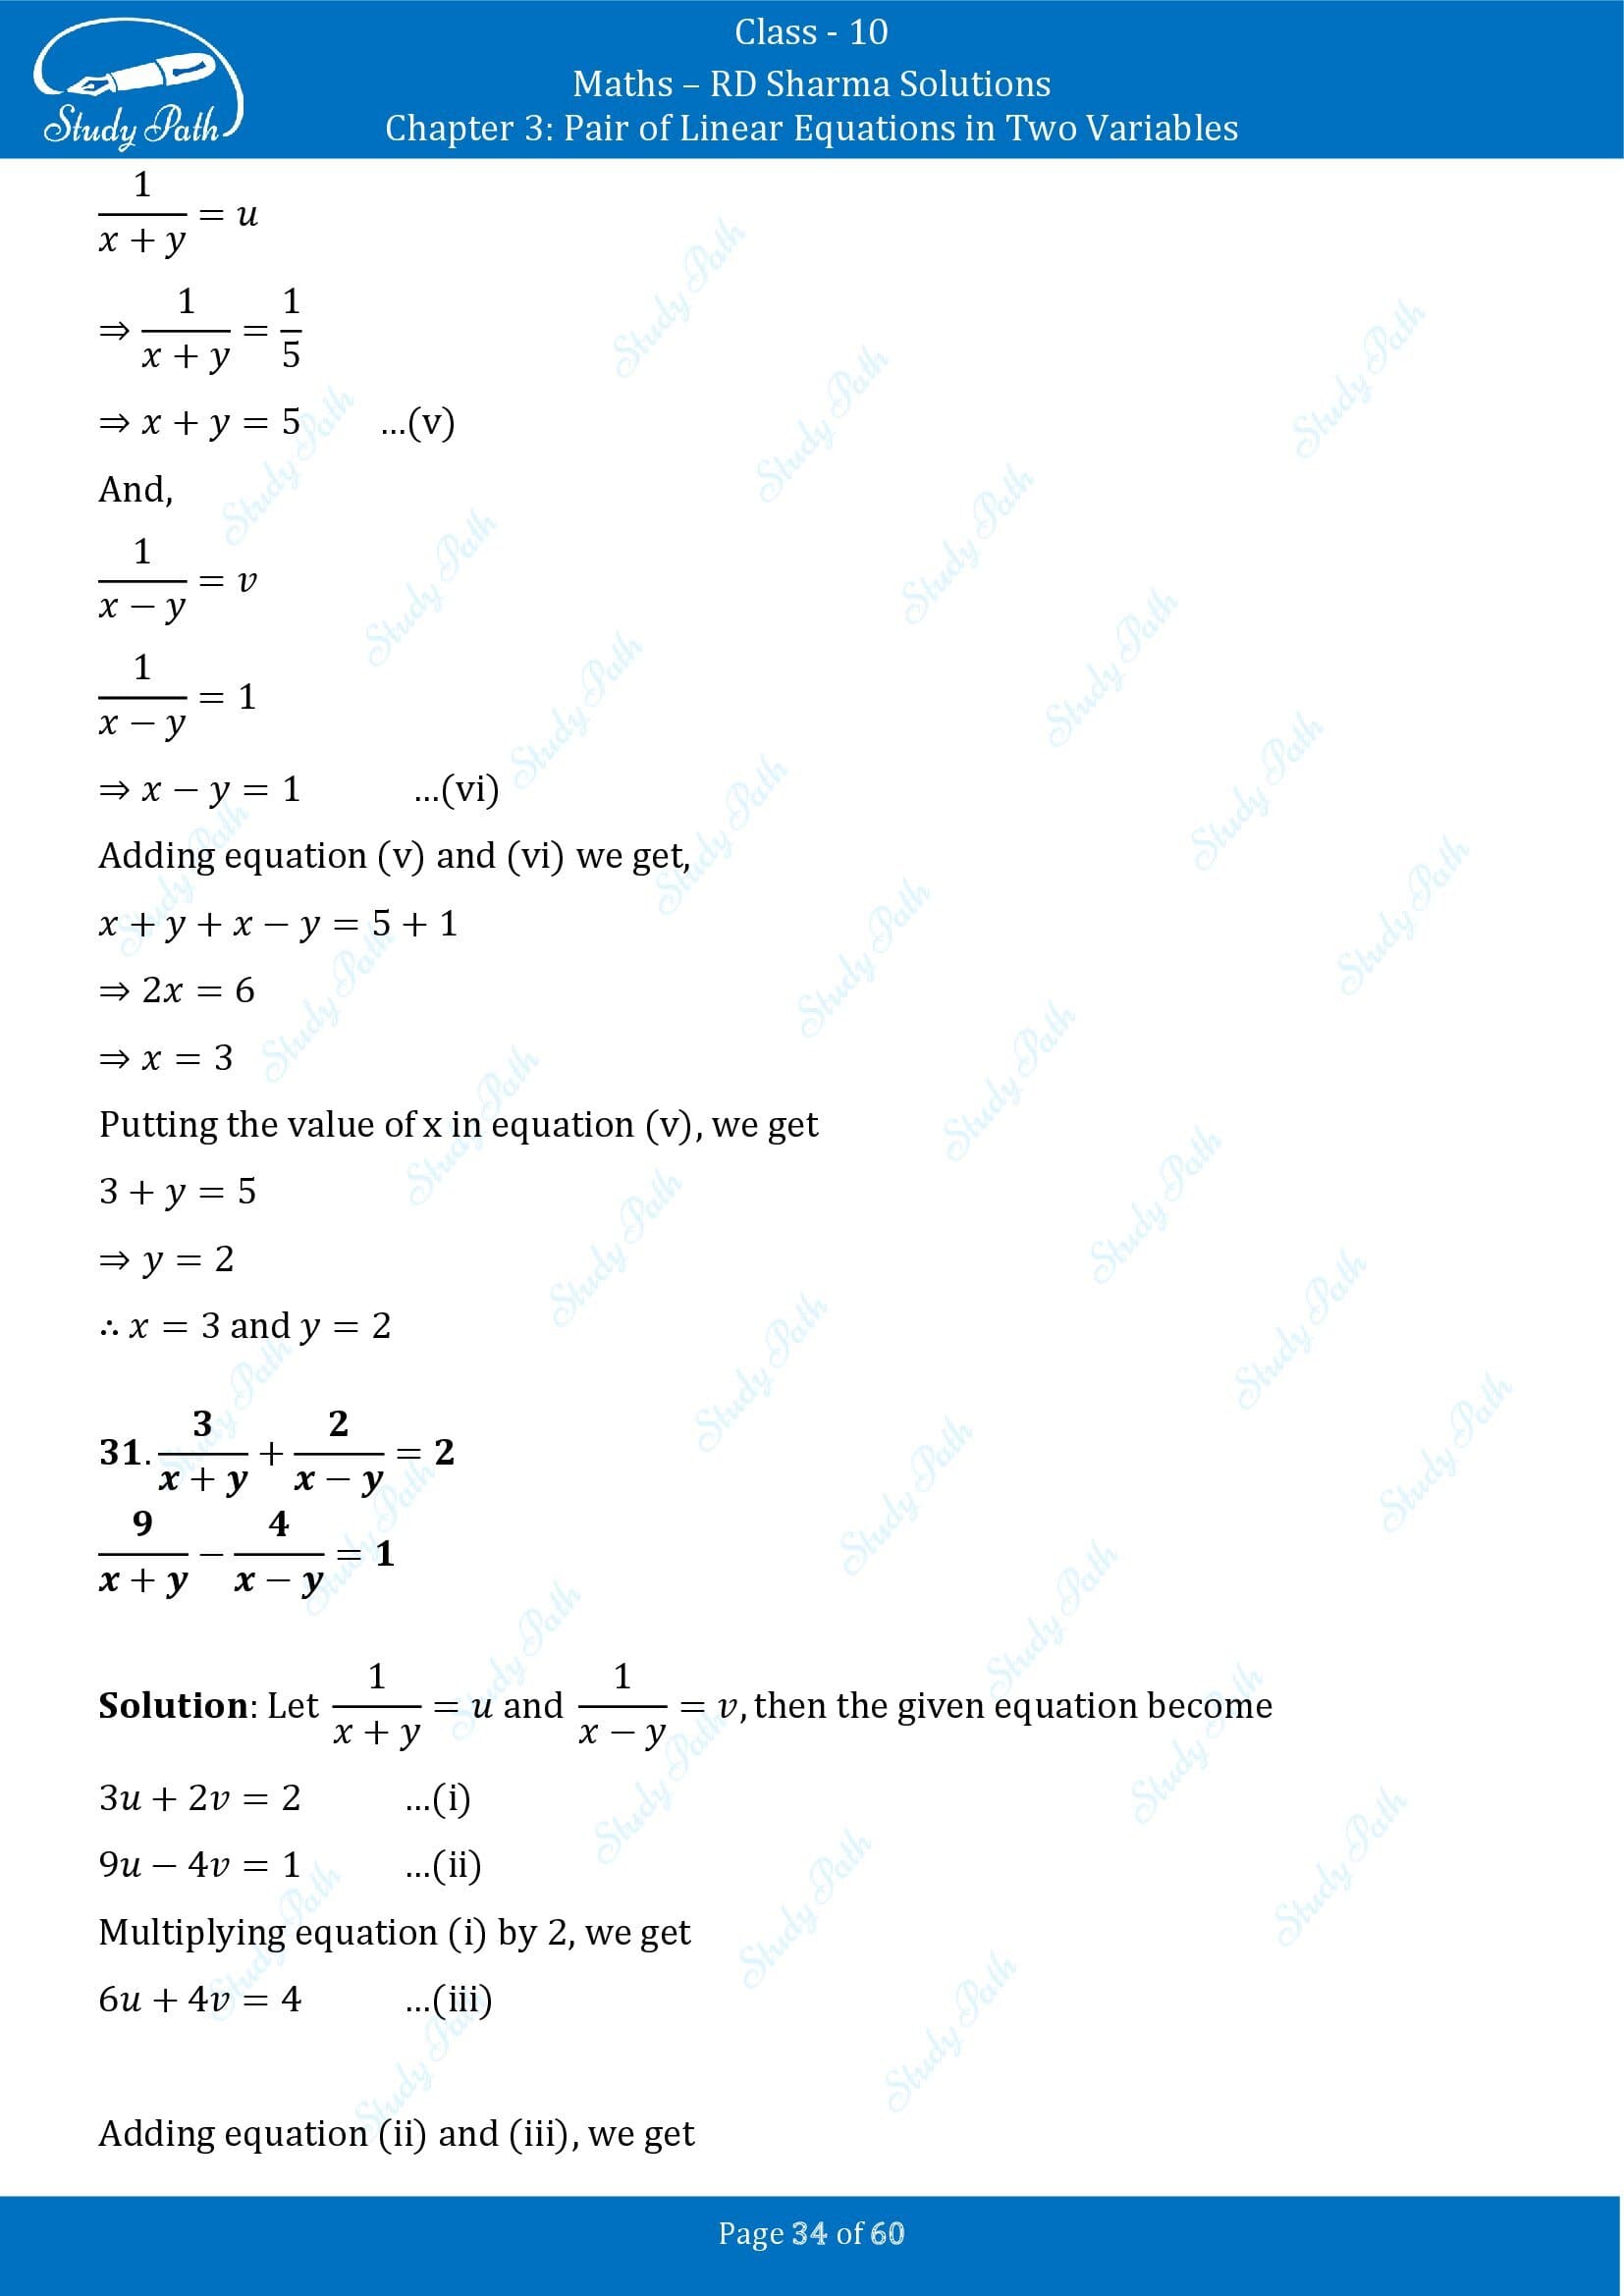 RD Sharma Solutions Class 10 Chapter 3 Pair of Linear Equations in Two Variables Exercise 3.3 00034